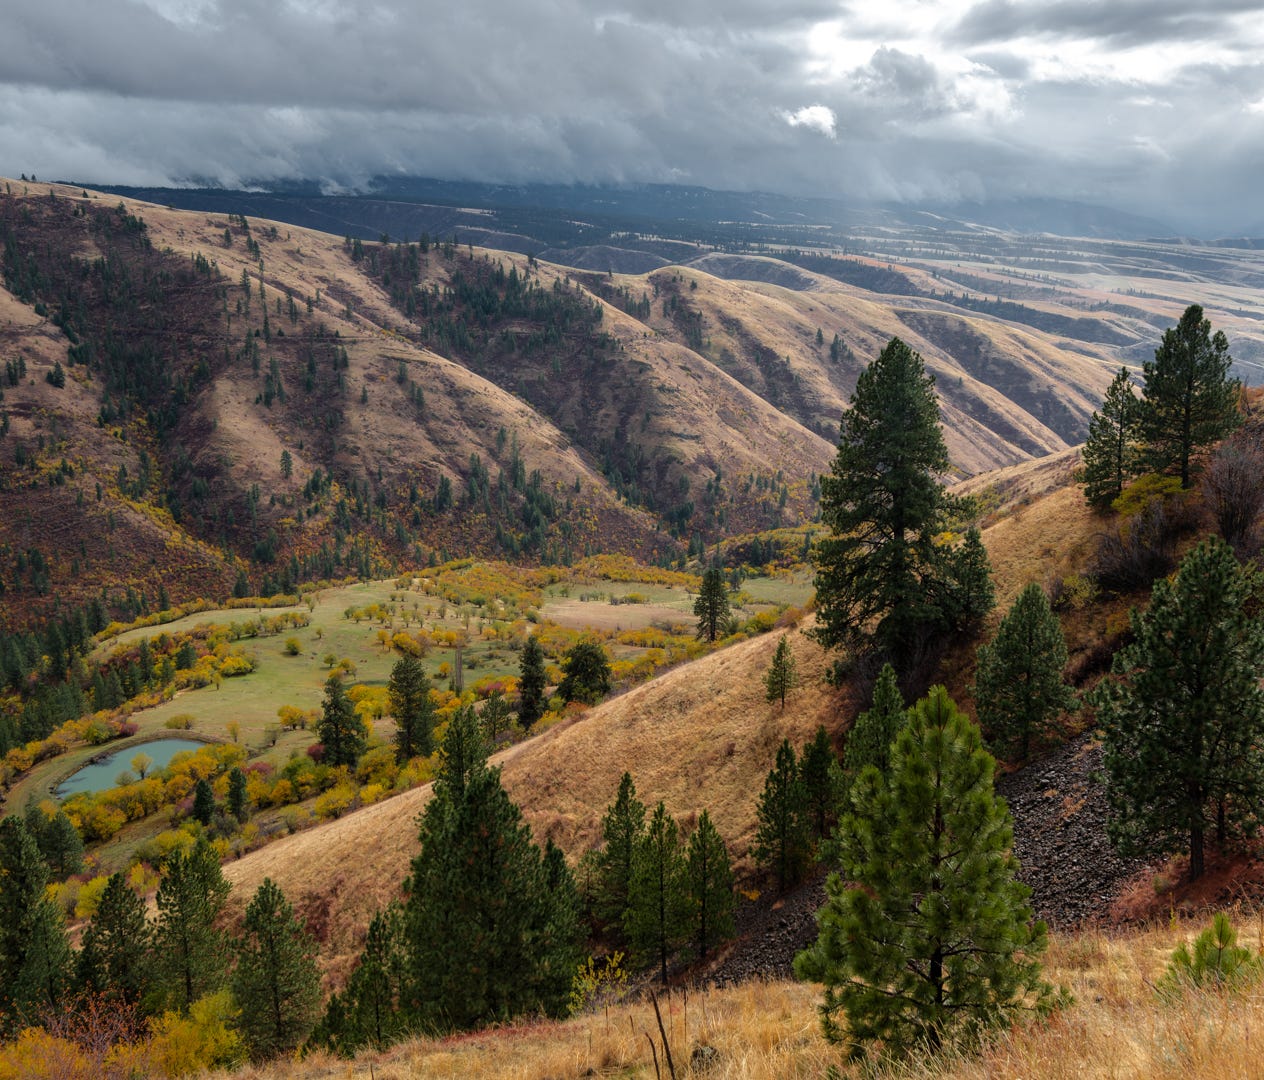 Idaho: Nez Perce National Historic Park - The legendary Nez Perce were among the final groups of Native Americans to offer formal resistance to the U.S. government, with their leader Chief Joseph heading an epic 1,170-mile, four-month migration in 18